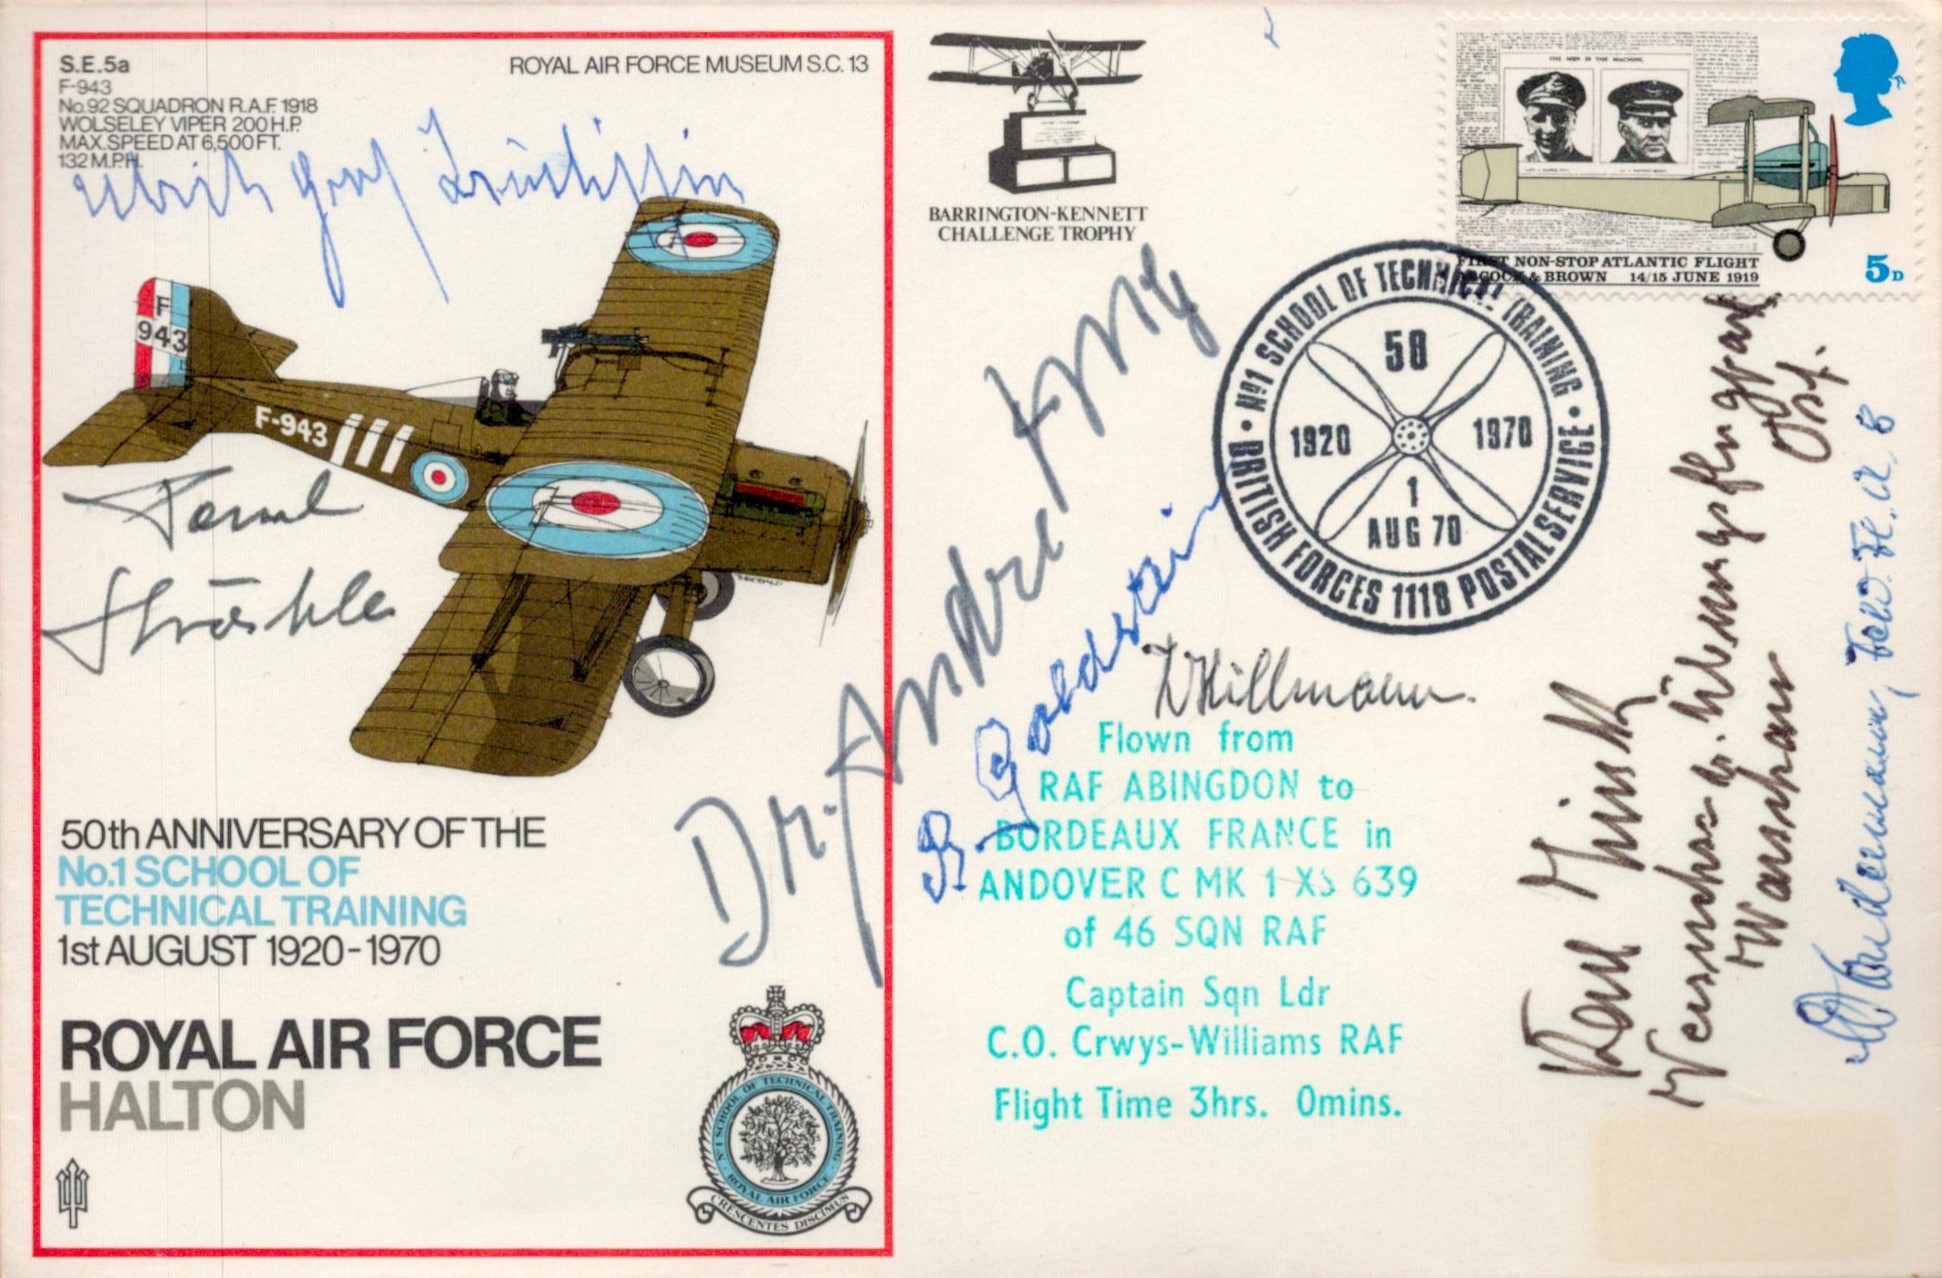 WW1 Seven German Pilots Signed on Royal Air Force Halton First Day Cover. British Stamp with 1 Aug